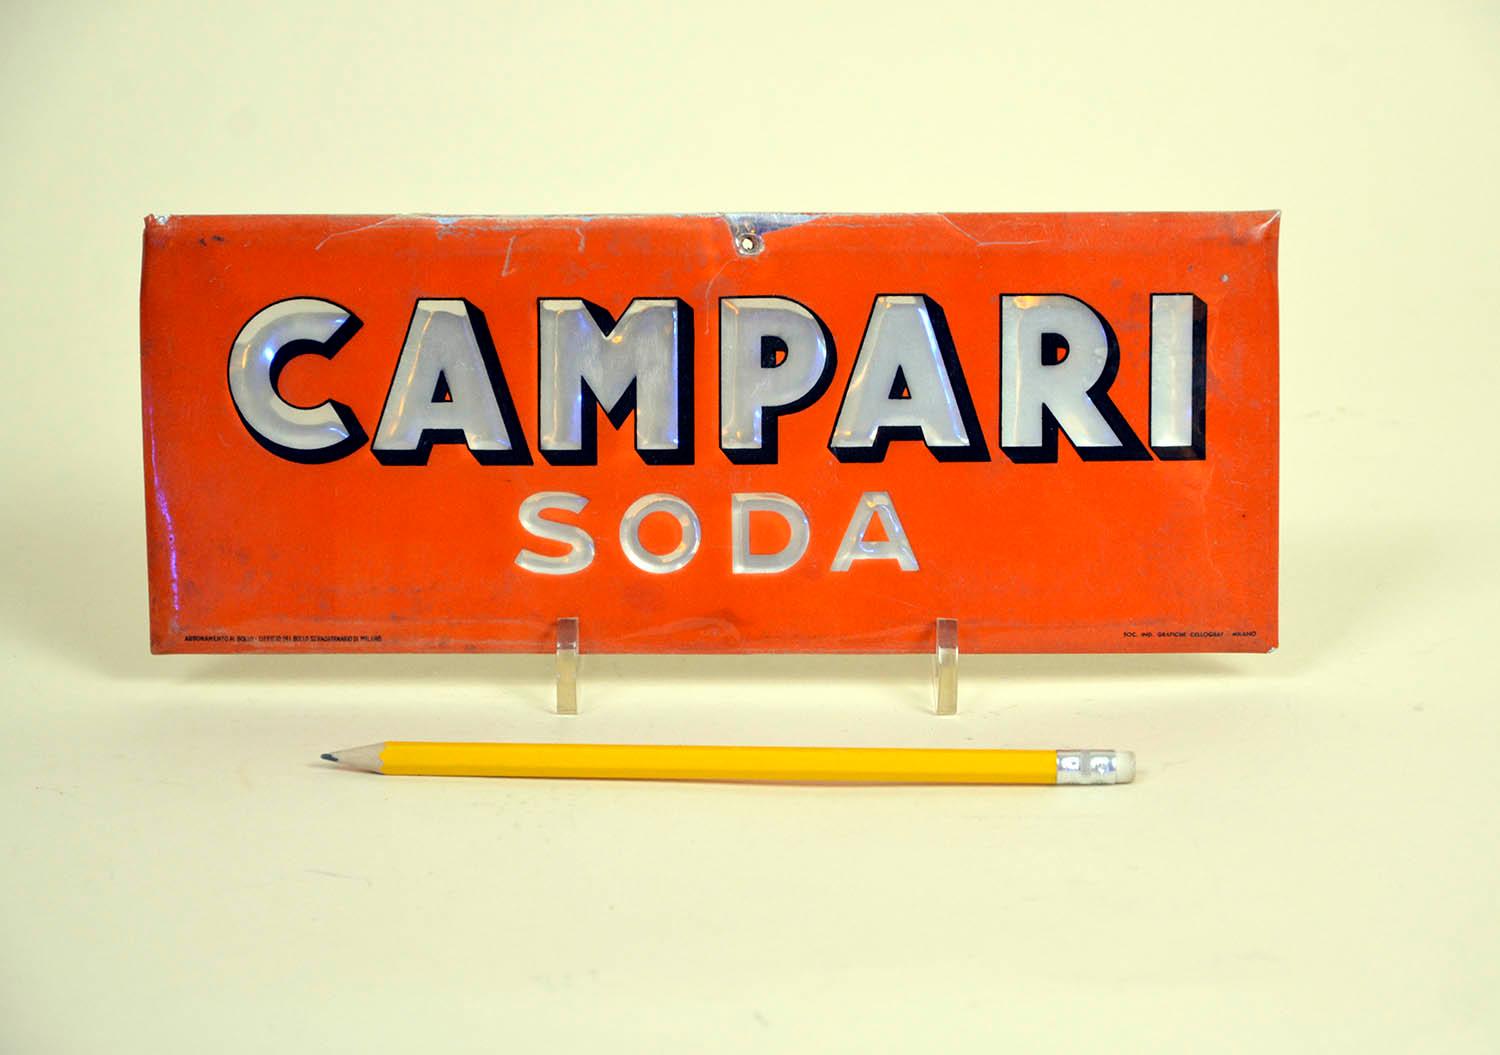 Rare vintage Campari Soda red sign, realized in foil laminated cardboard and made by Cellograf-Simp Milan, Italy in the 1950s.

The sign is slightly curved around the borders.

Collector's note:

Campari soda or Camparisoda is a single dose